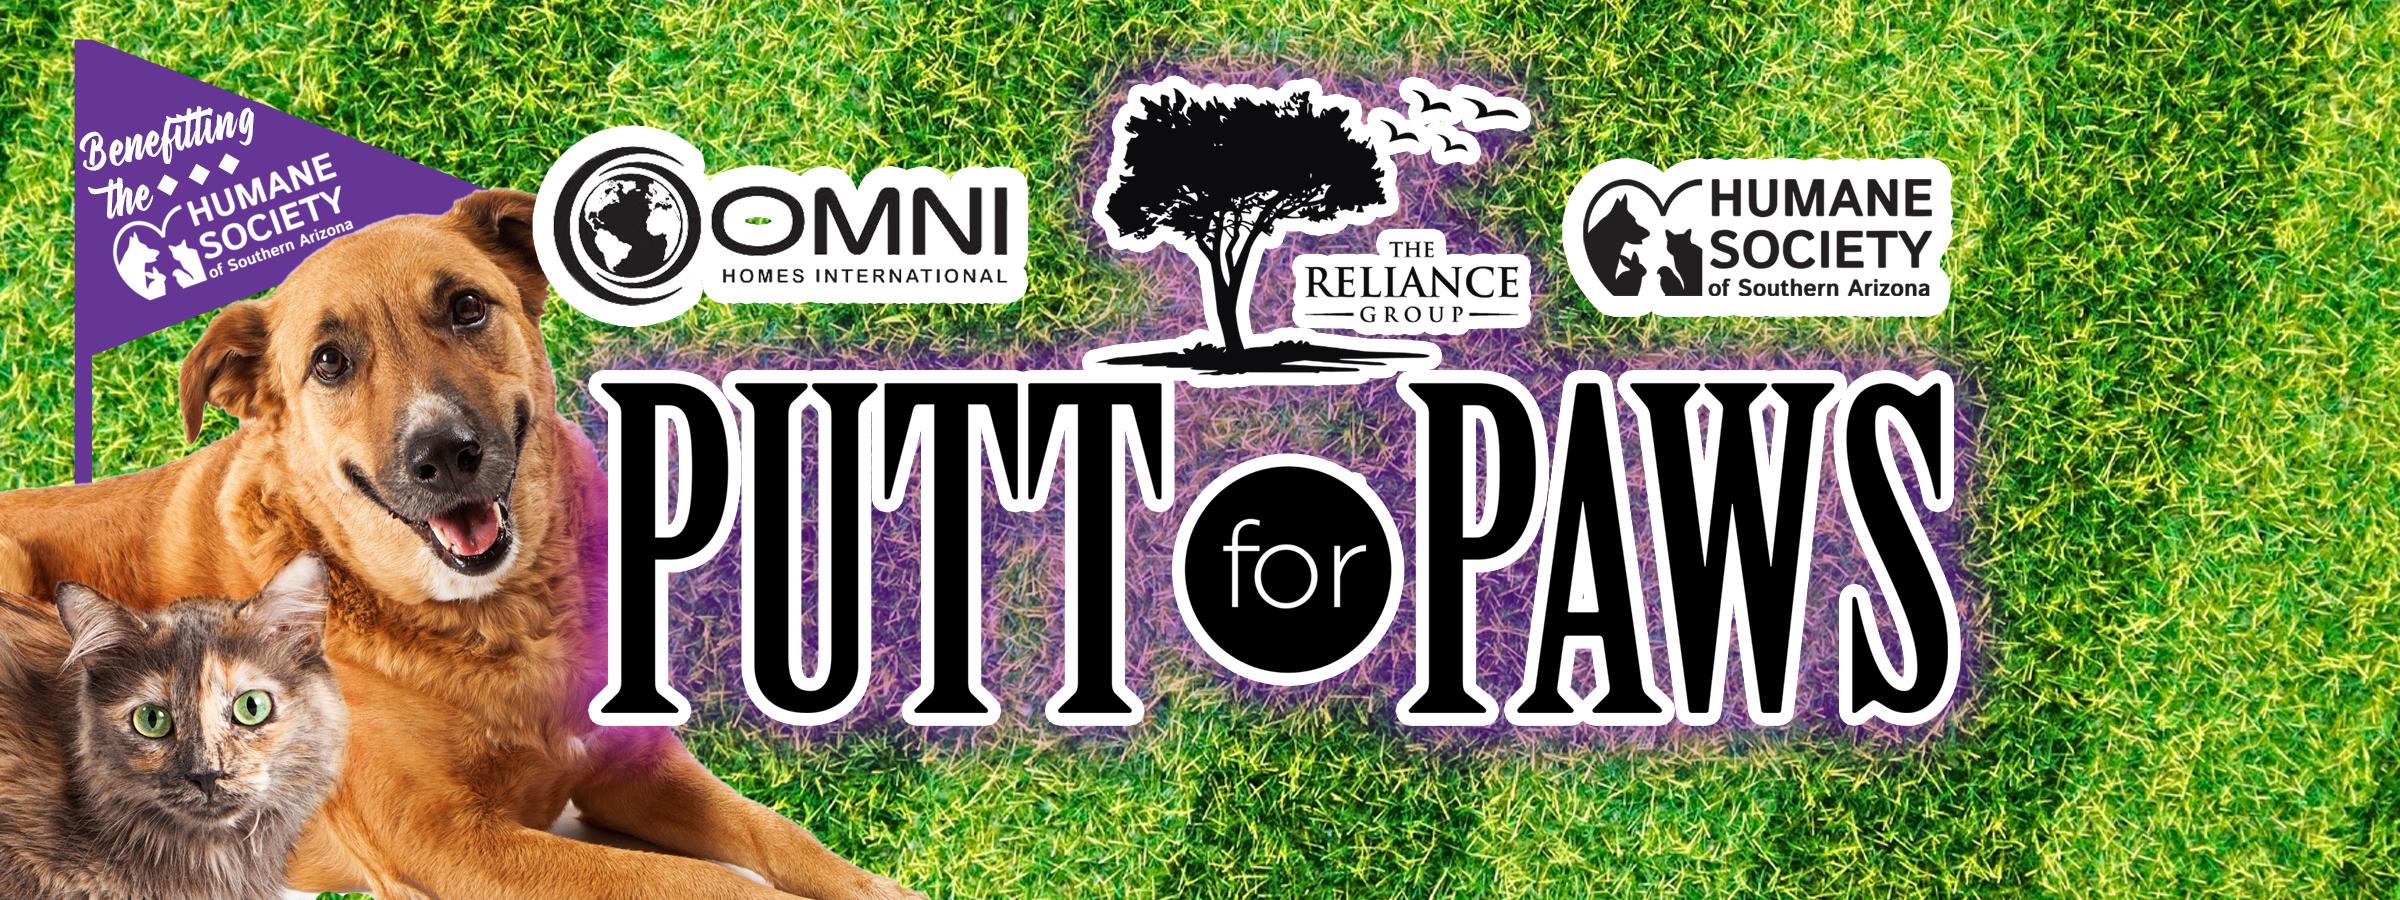 4th Annual Putt for Paws Golf Tournament